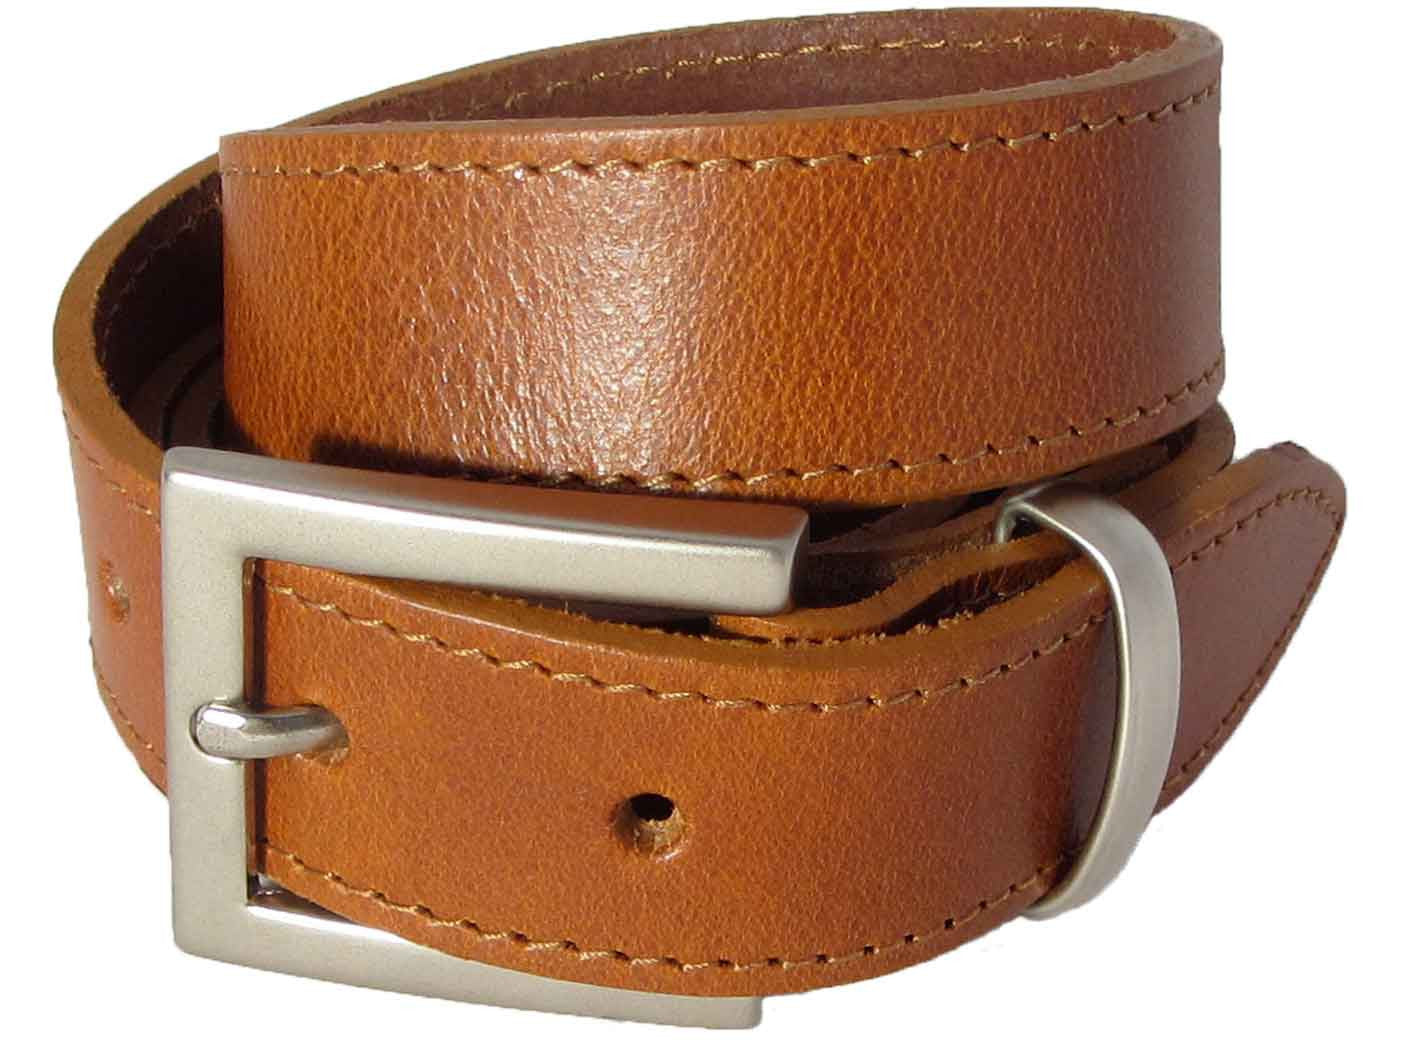 Lady Orion Tan Brown Belt with Silver Buckle luxury leather